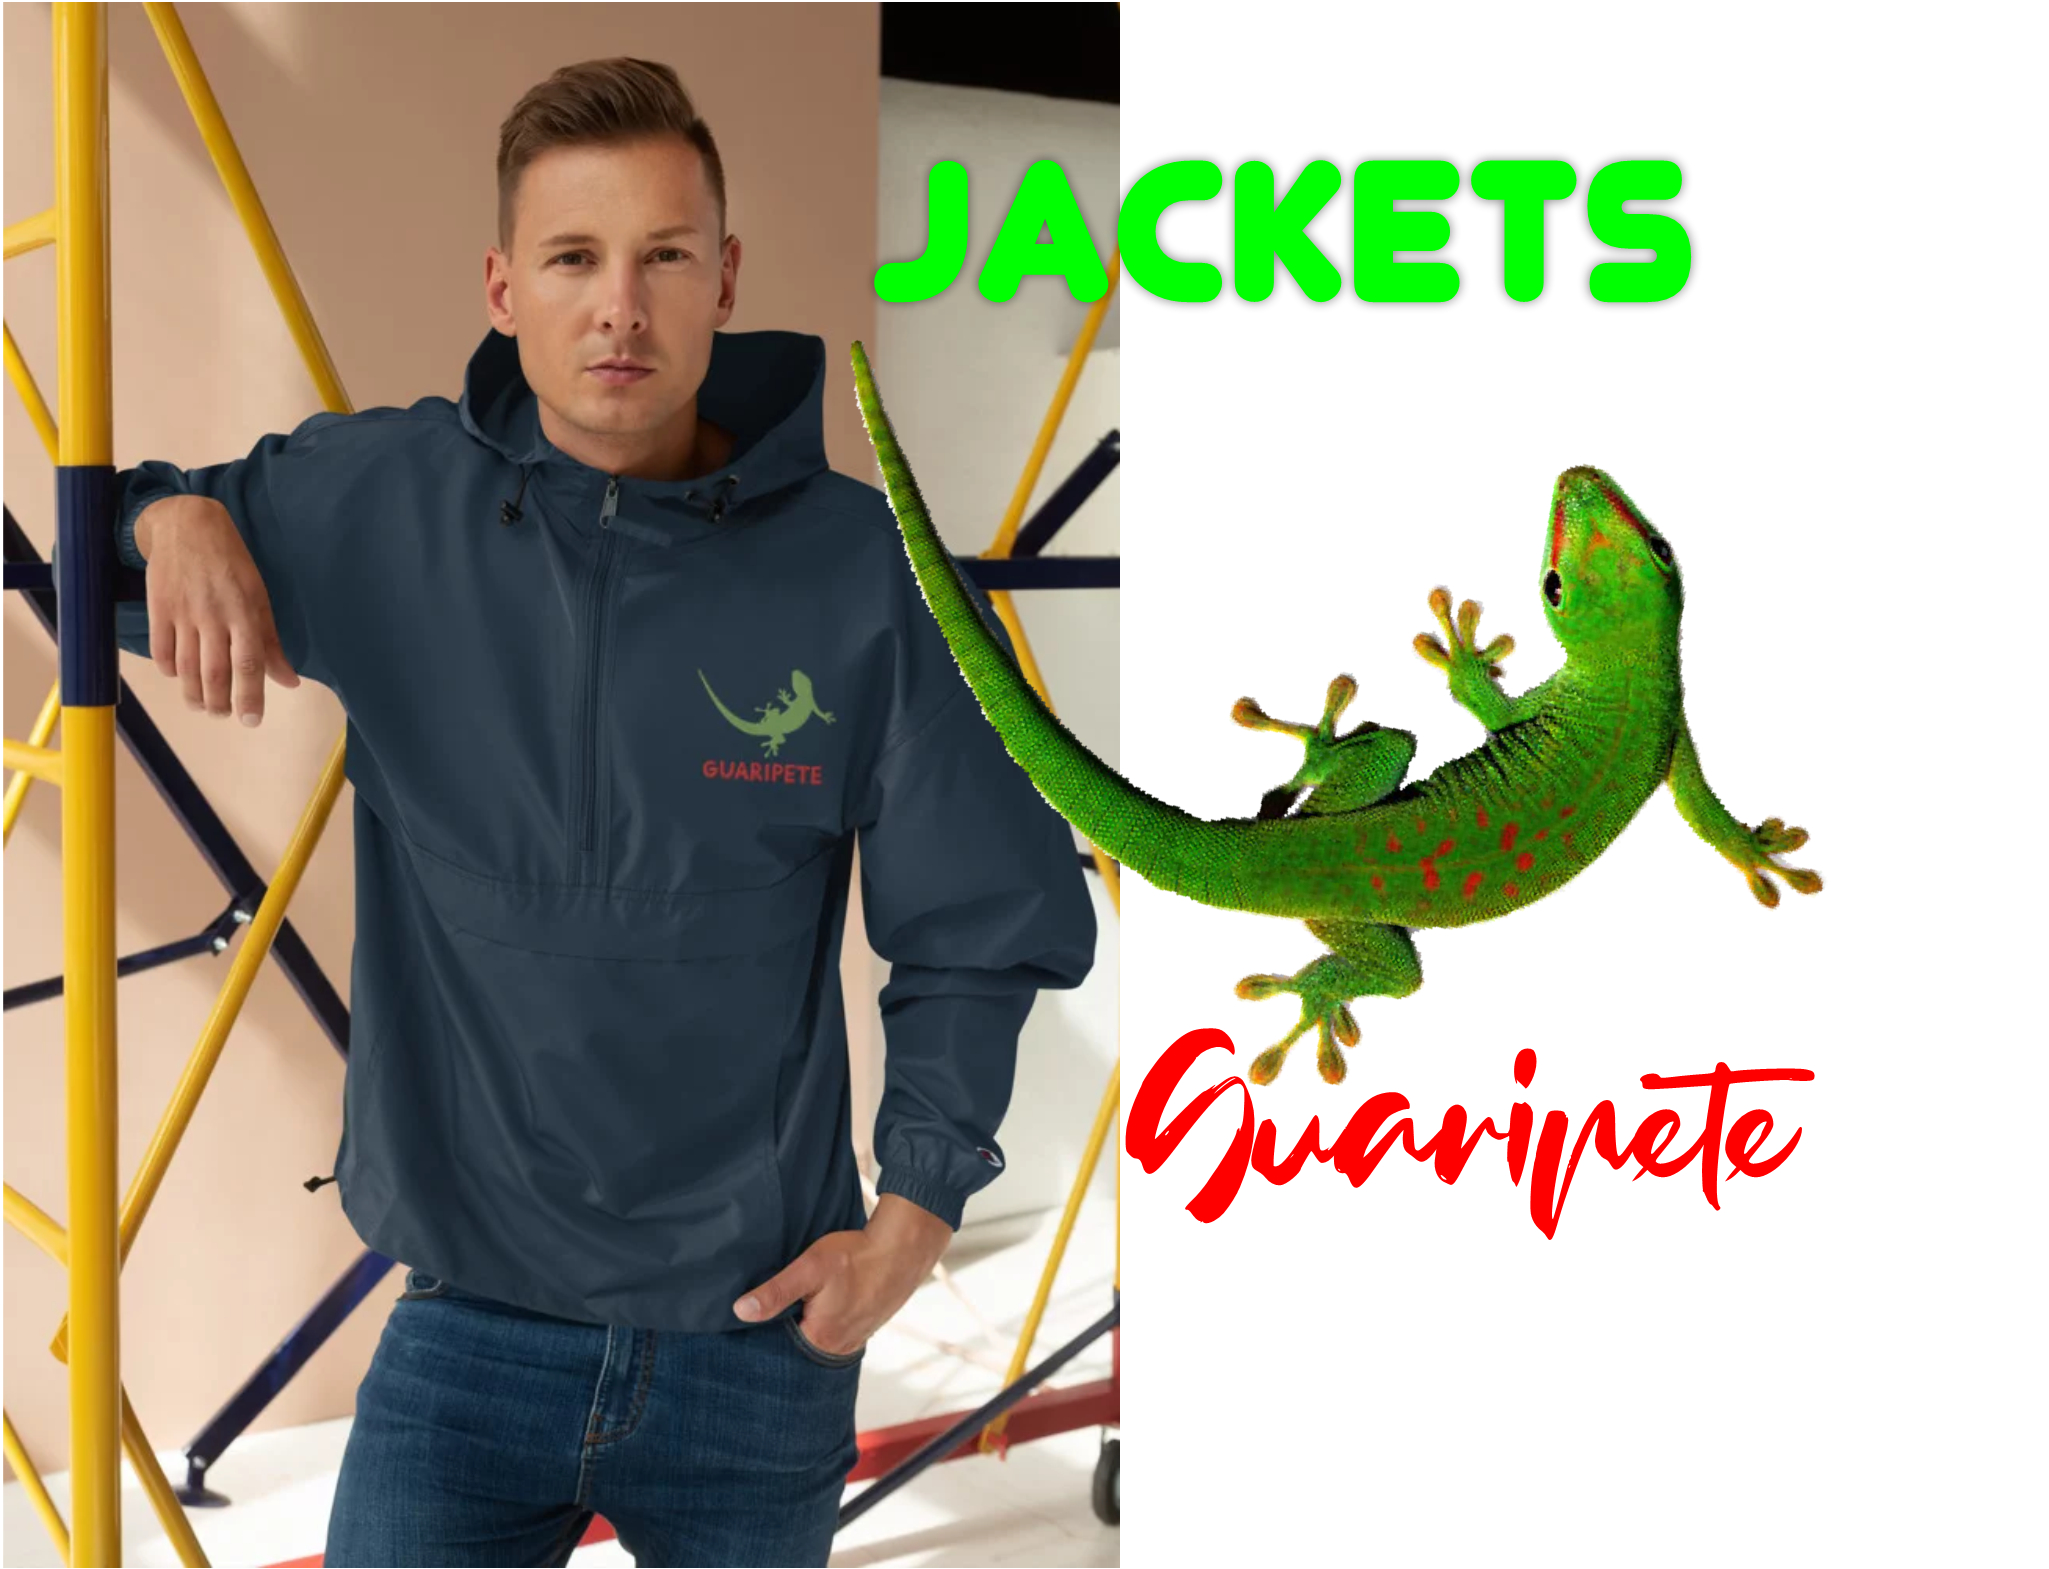 Jackets by Guaripete